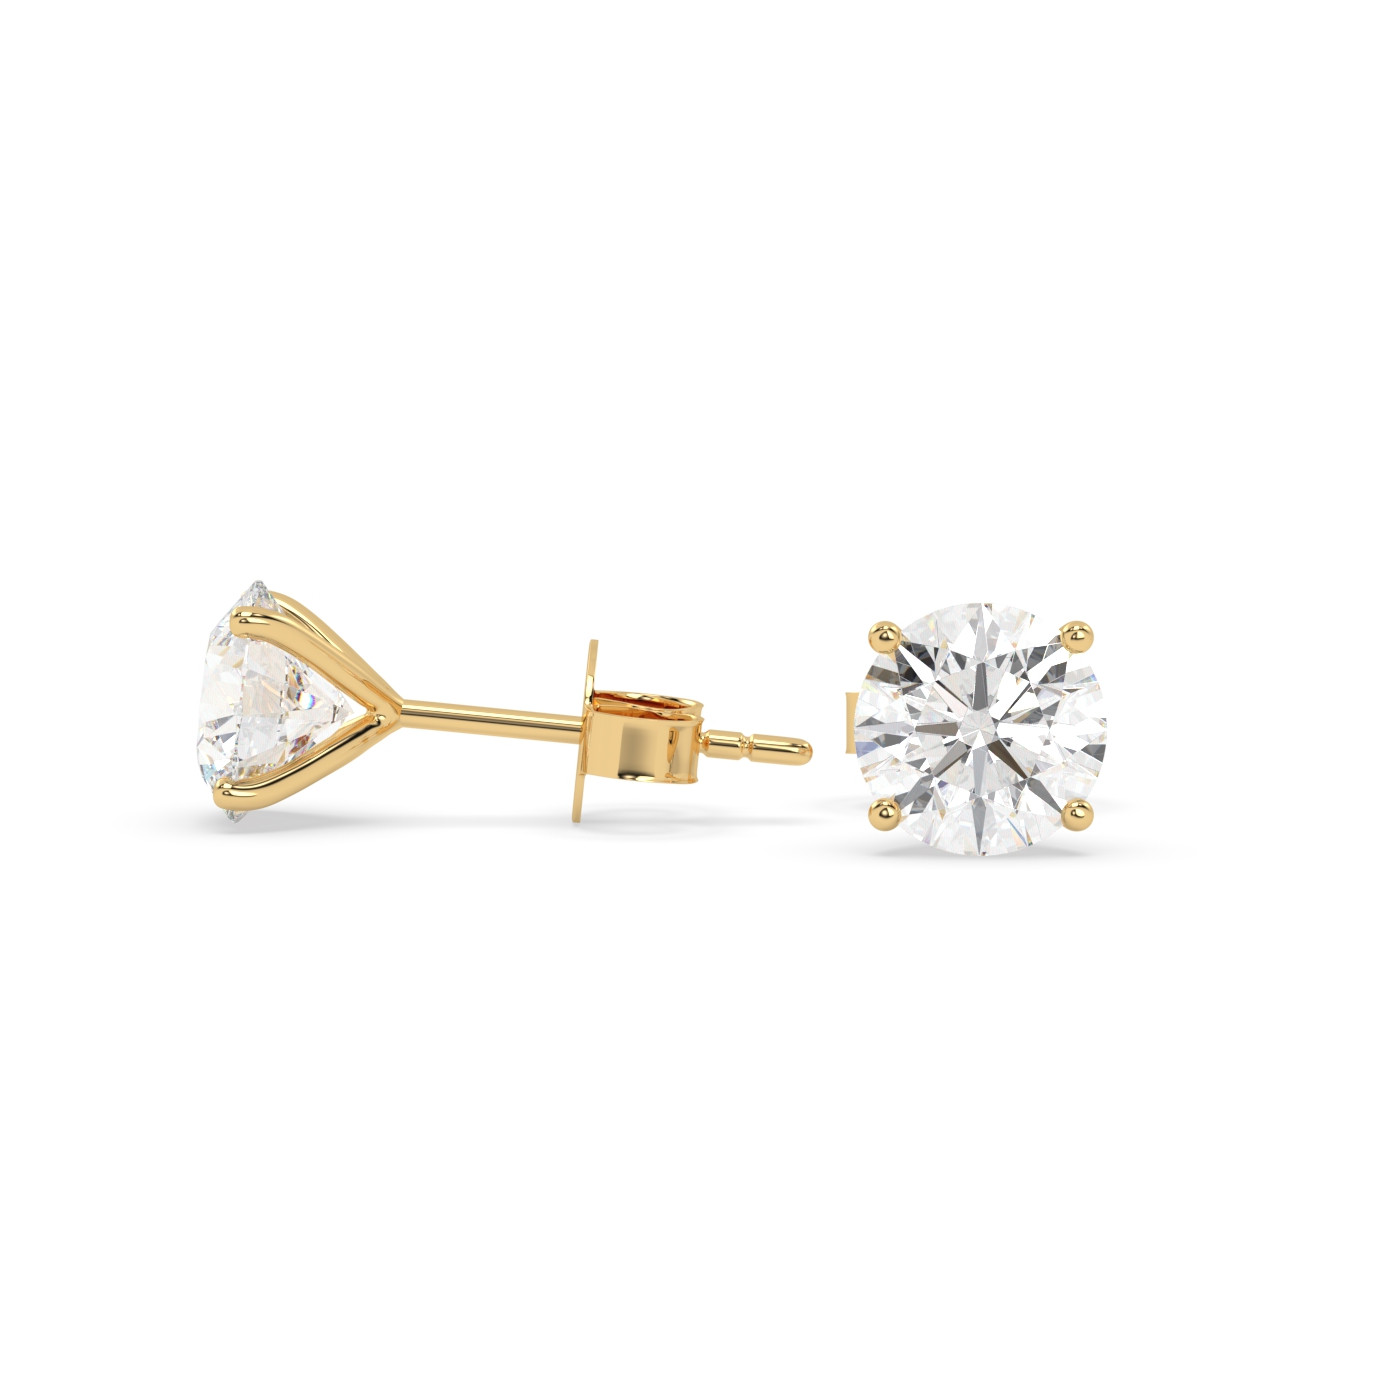 18k yellow gold  1.0 carat round stud earrings with butterfly back